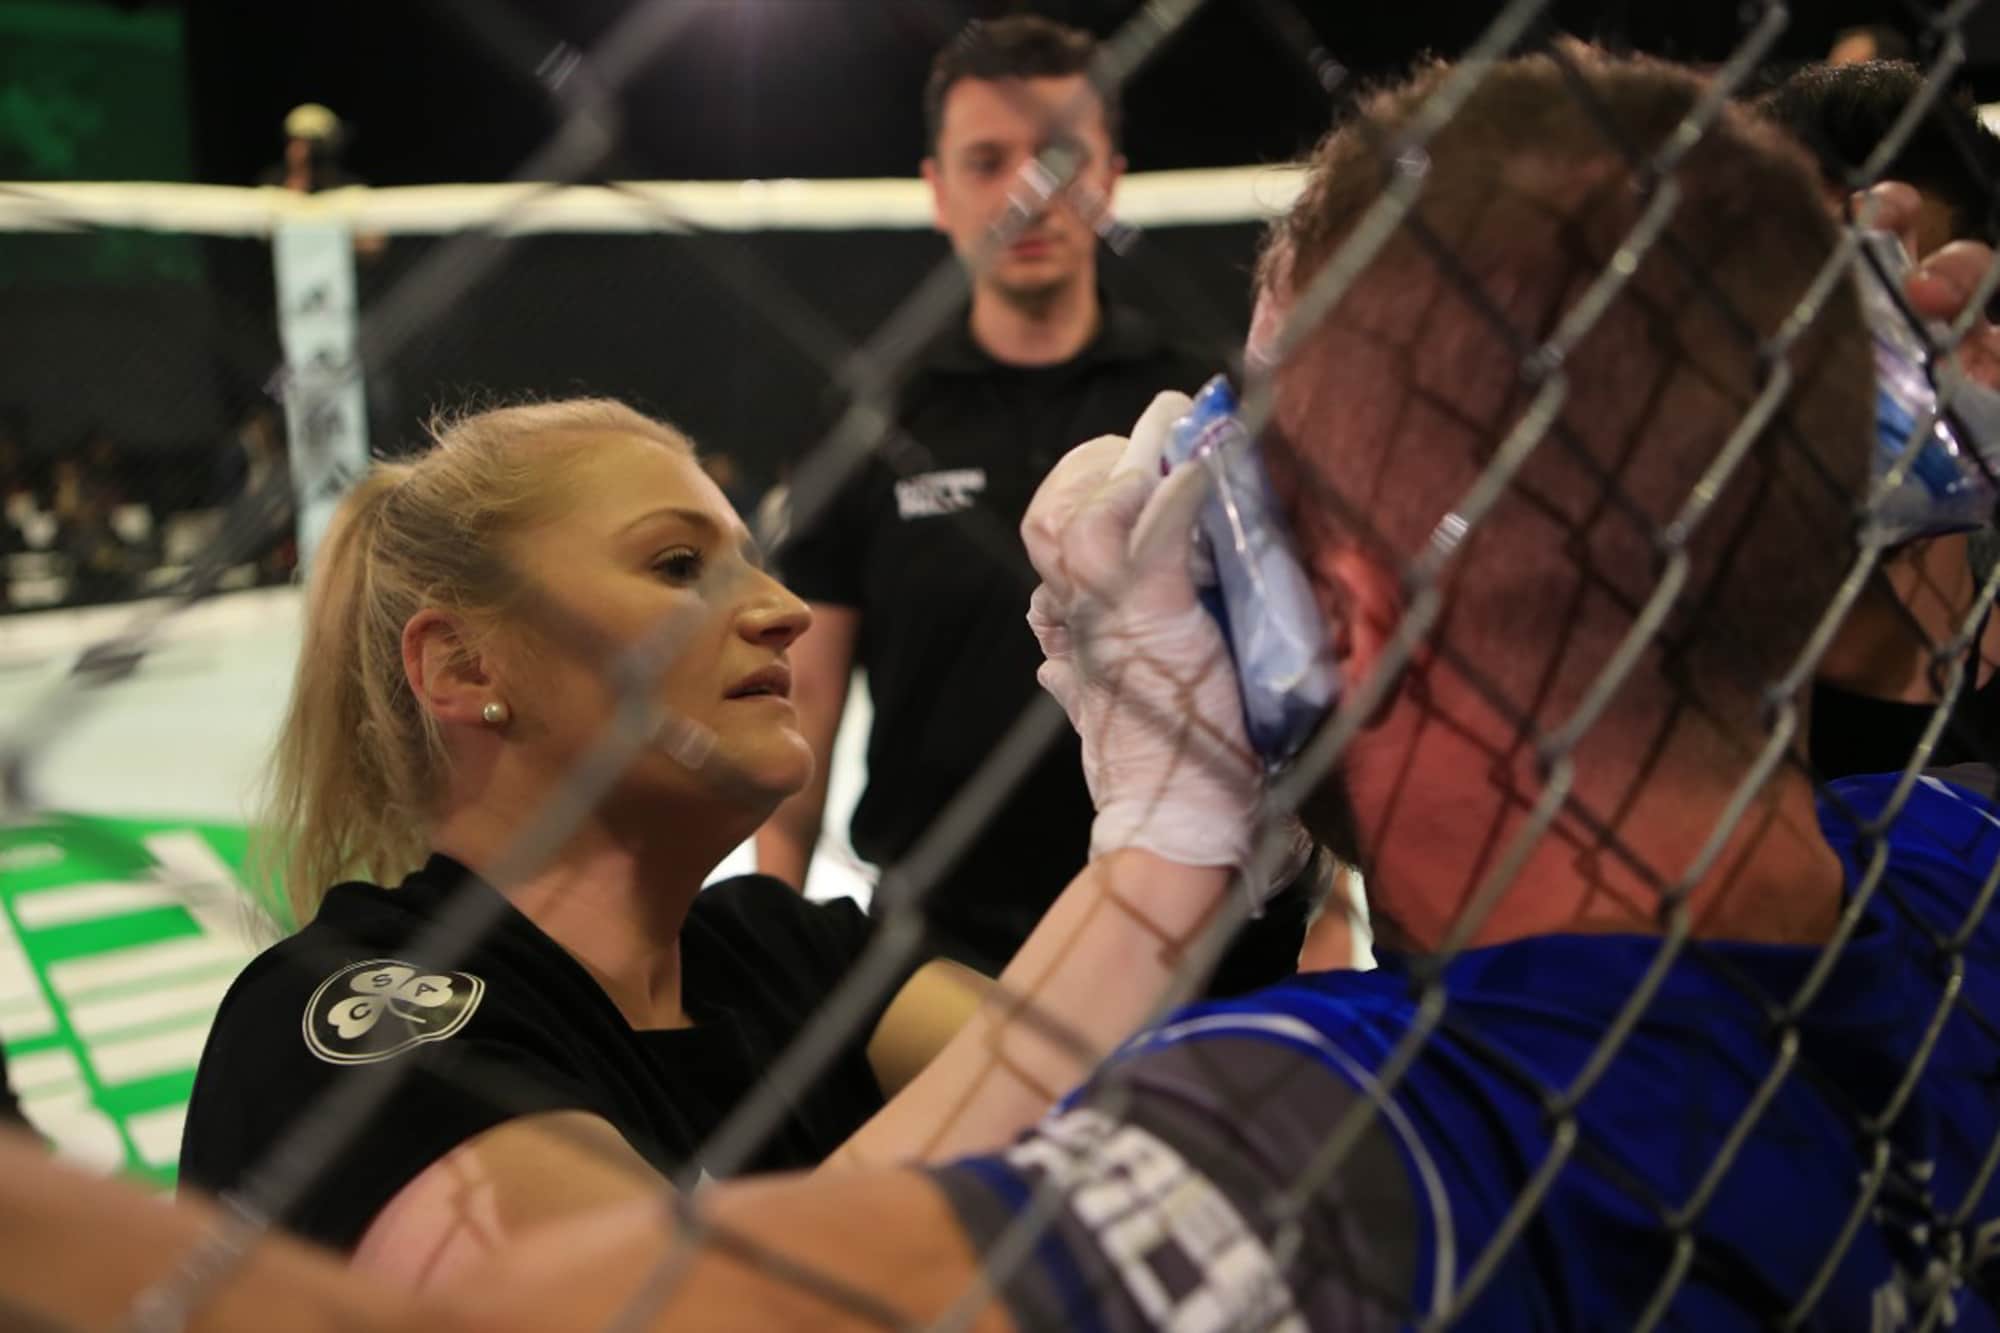 Women in MMA: Jess Isaacson on life as a cutwoman and keeping fighters safe